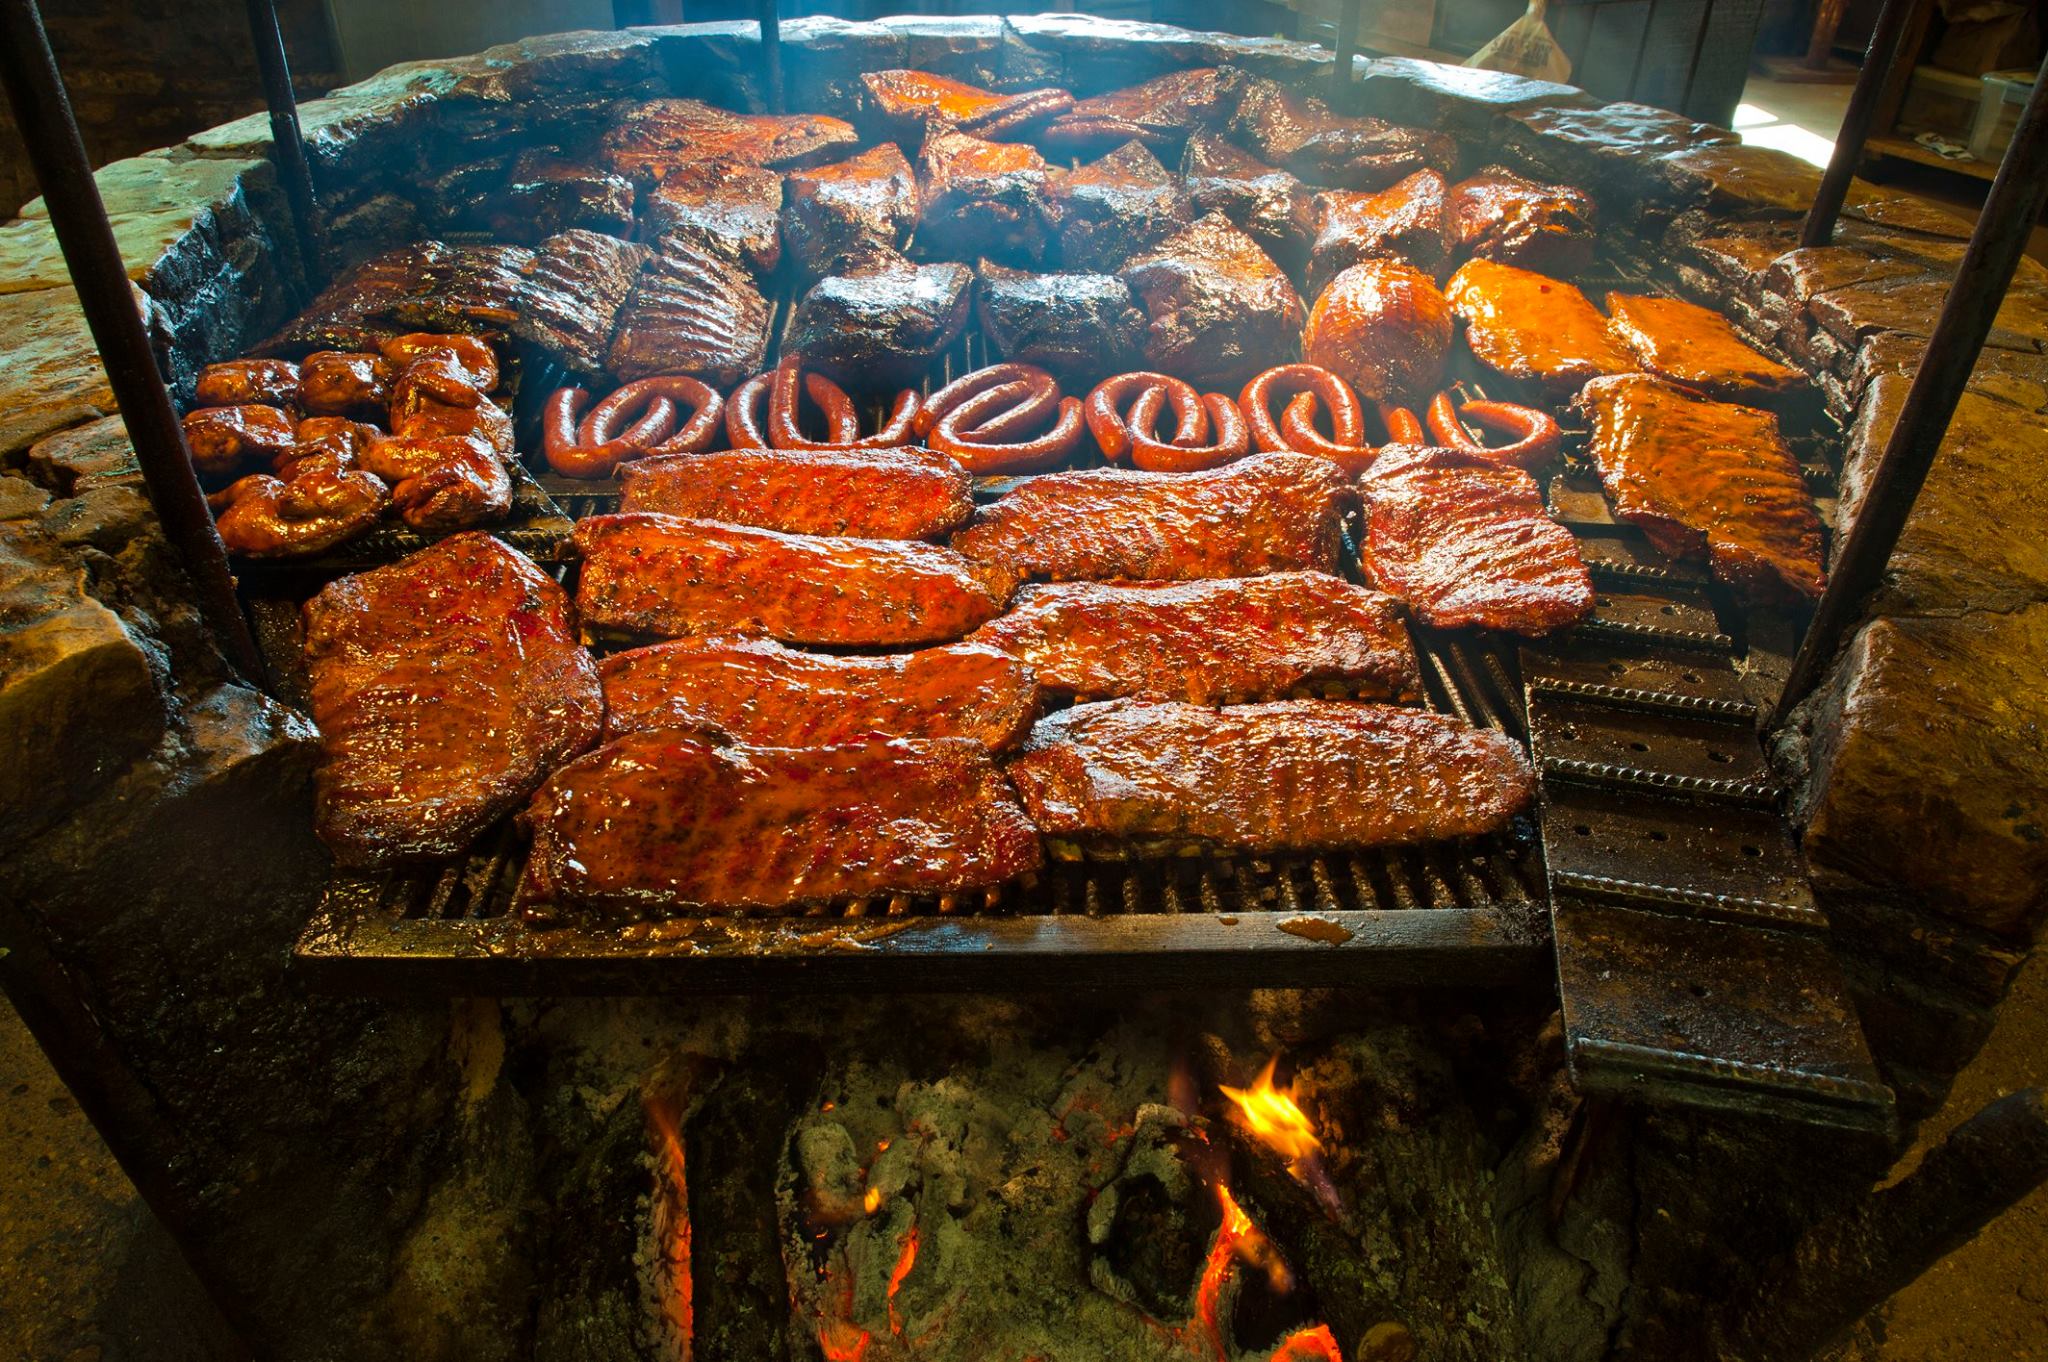 Is TX’s Salt Lick “The Best Damn Barbecue” in the Country? Left at